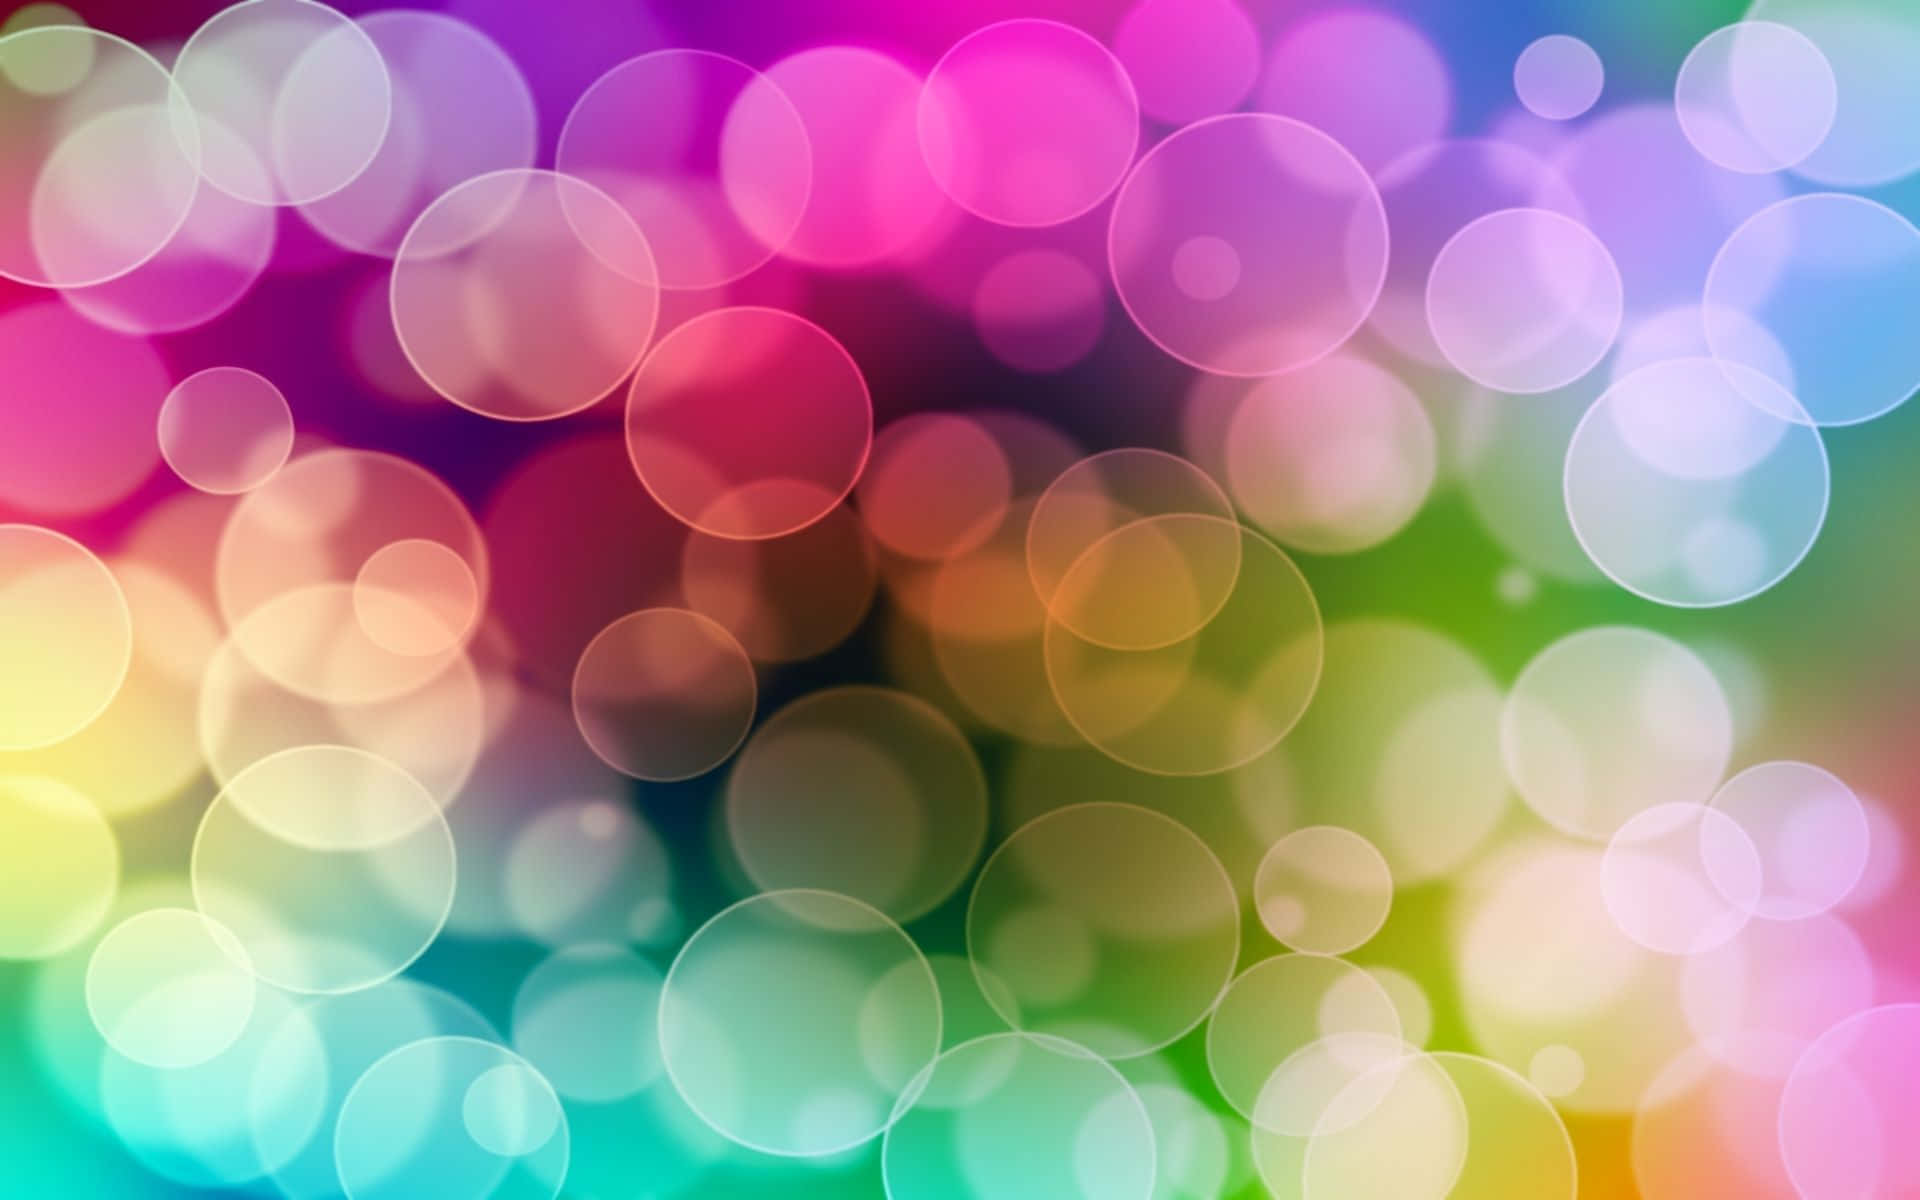 A Vibrant and Colorful Abstract Background